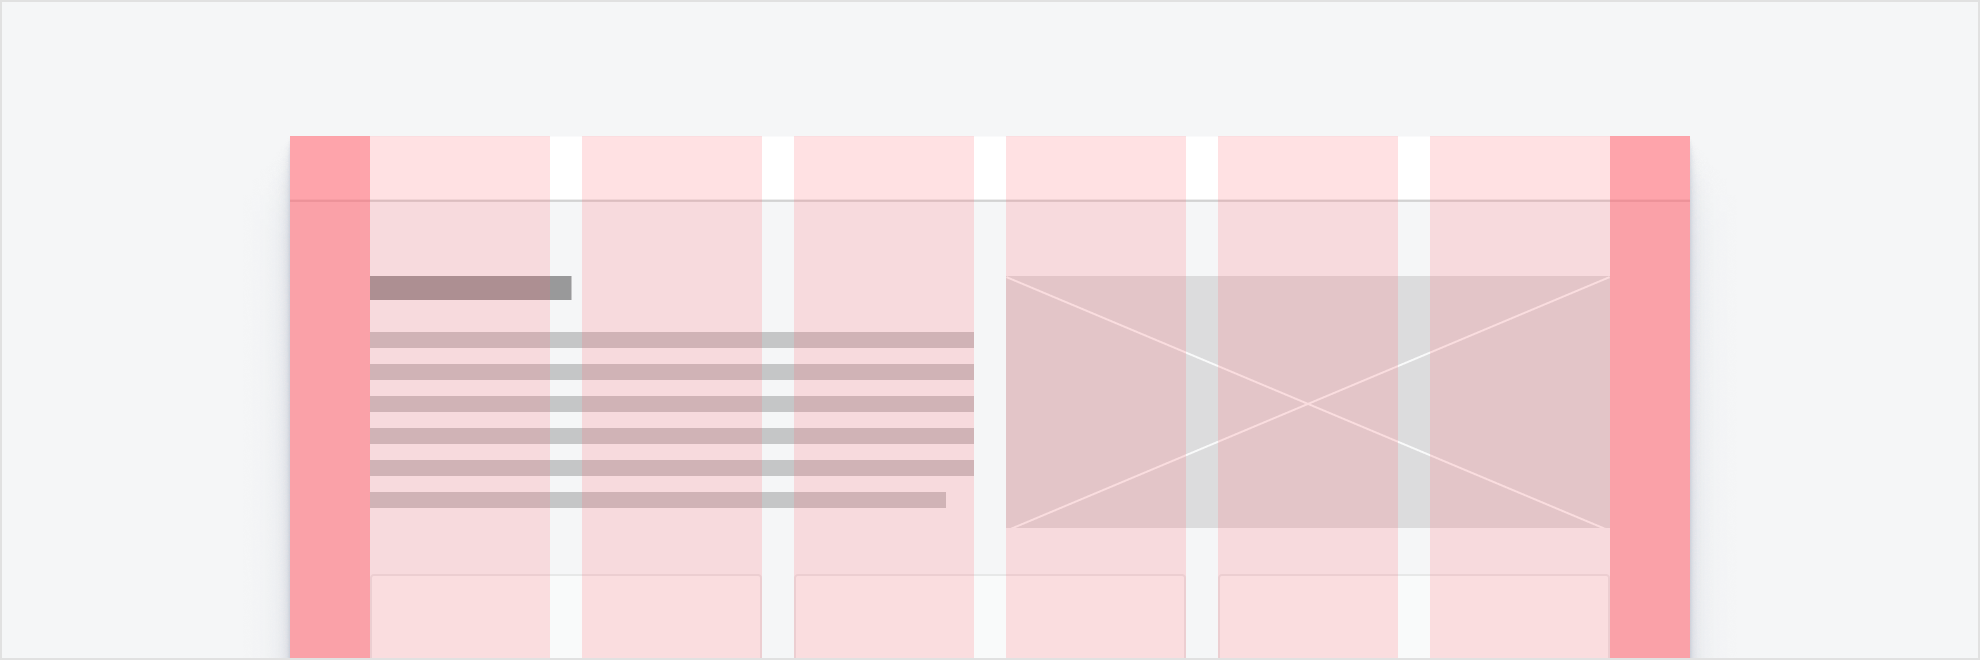 A 6-column grid for S breakpoints, featuring an example of how content might be spaced across the screen. 